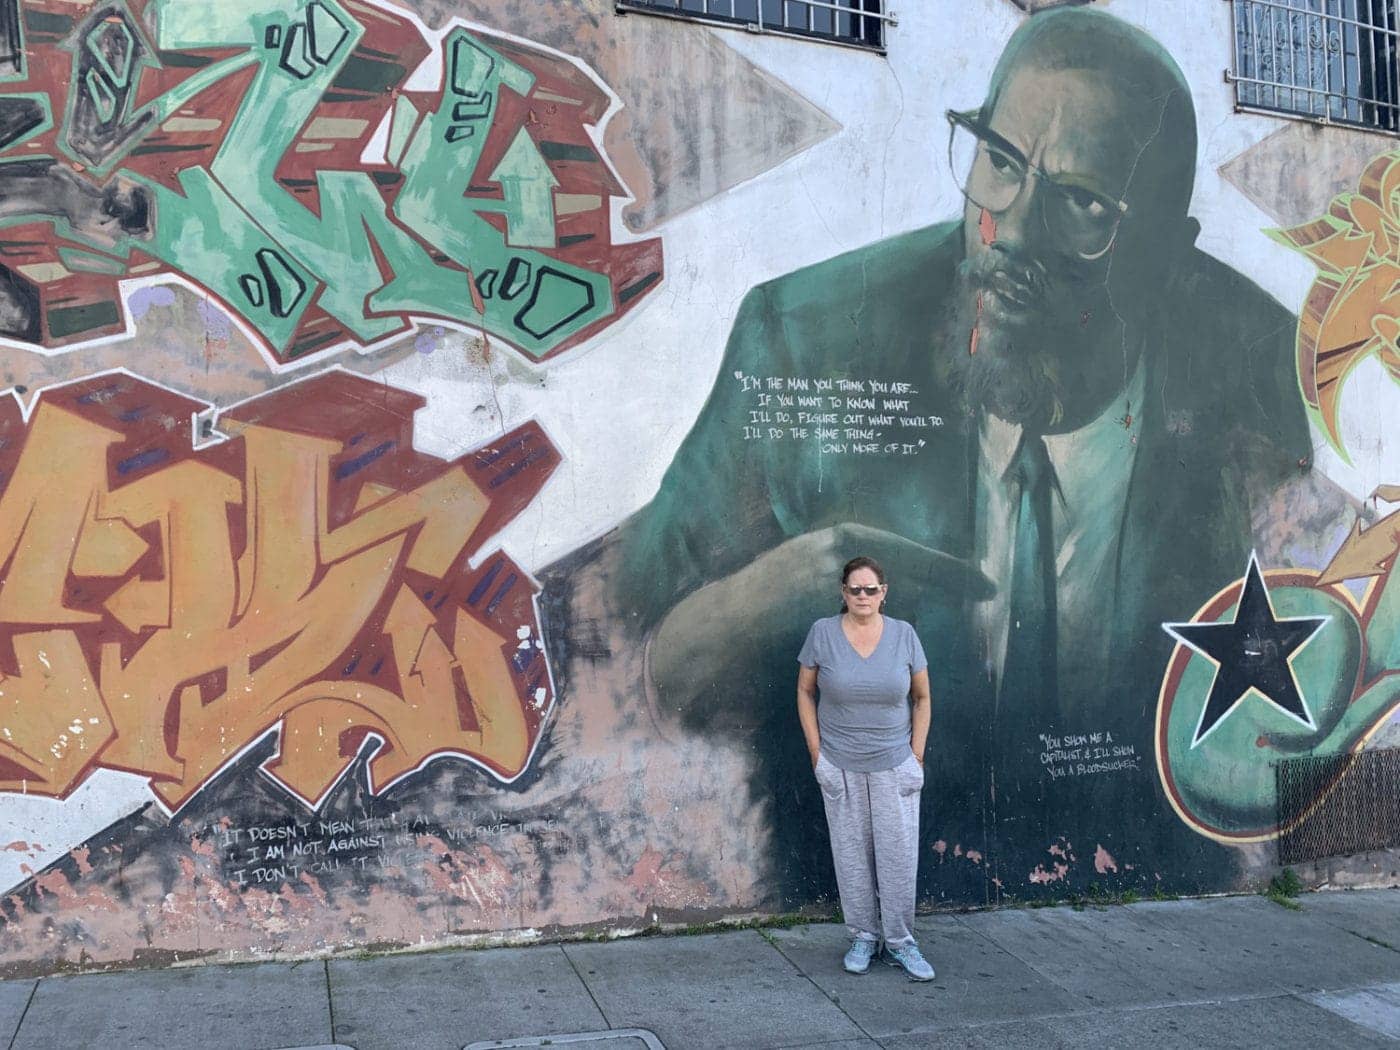 Kelly-at-the-Malcolm-X-mural-Bayview-SF-22022-1400x1050, T.H.U.G L.I.F.E: From gangster to growth, Abolition Now! 